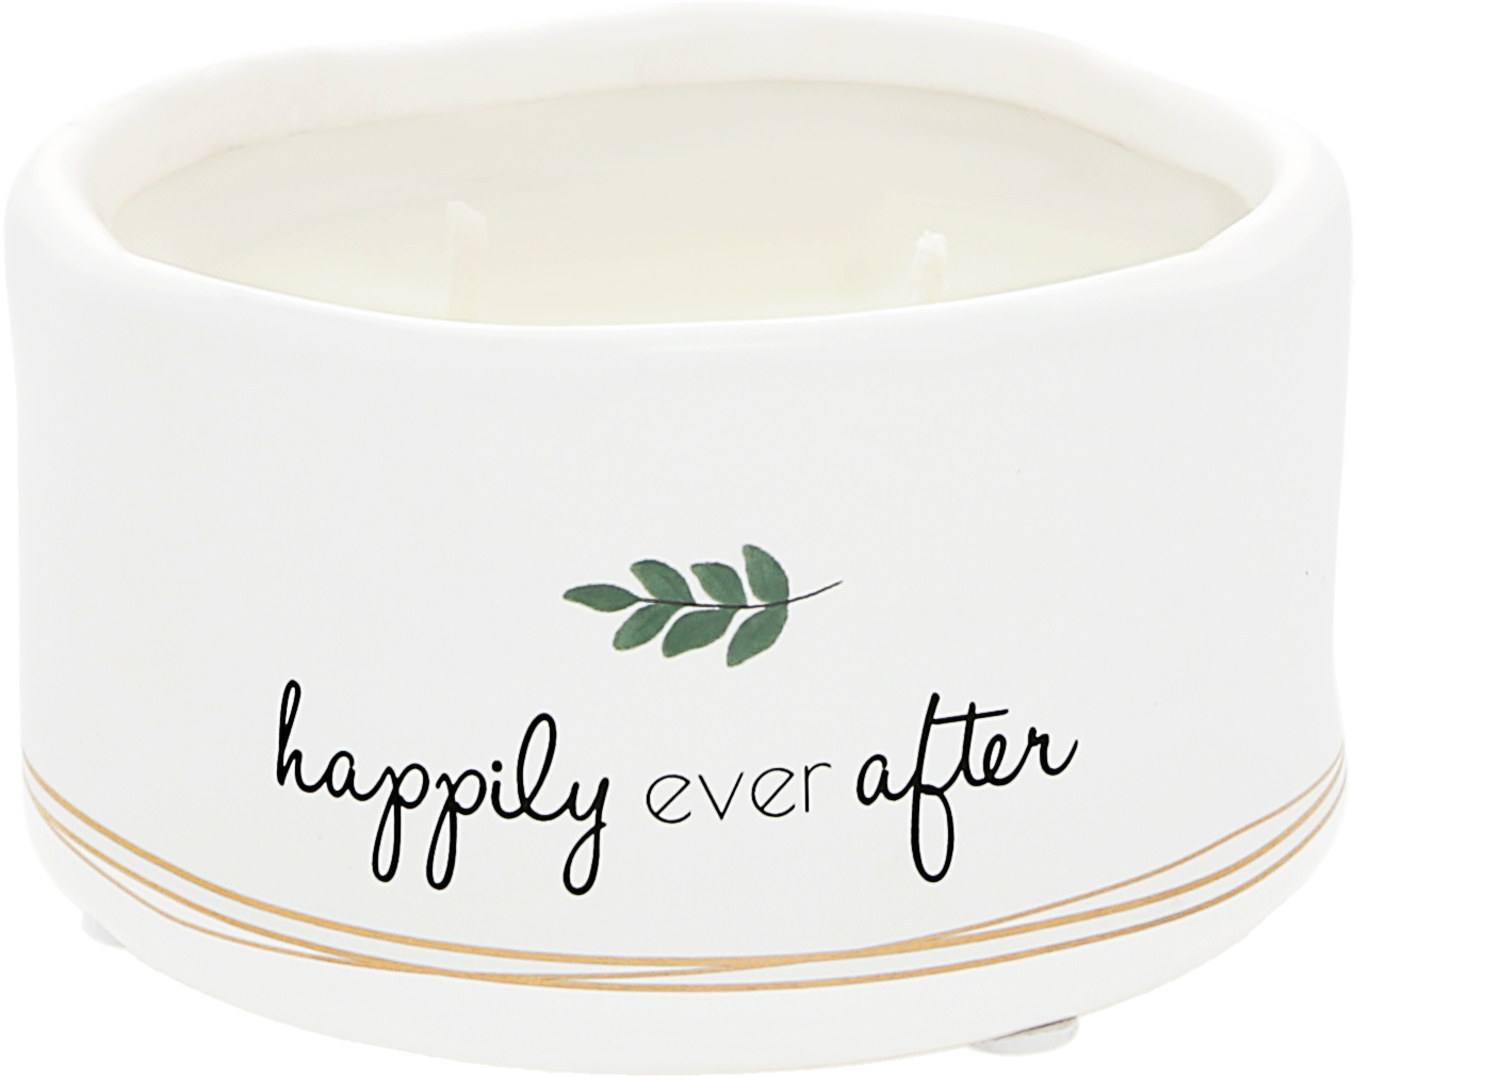 Happily Ever After by Love Grows - Happily Ever After - 8 oz - 100% Soy Wax Reveal Candle
Scent: Tranquility